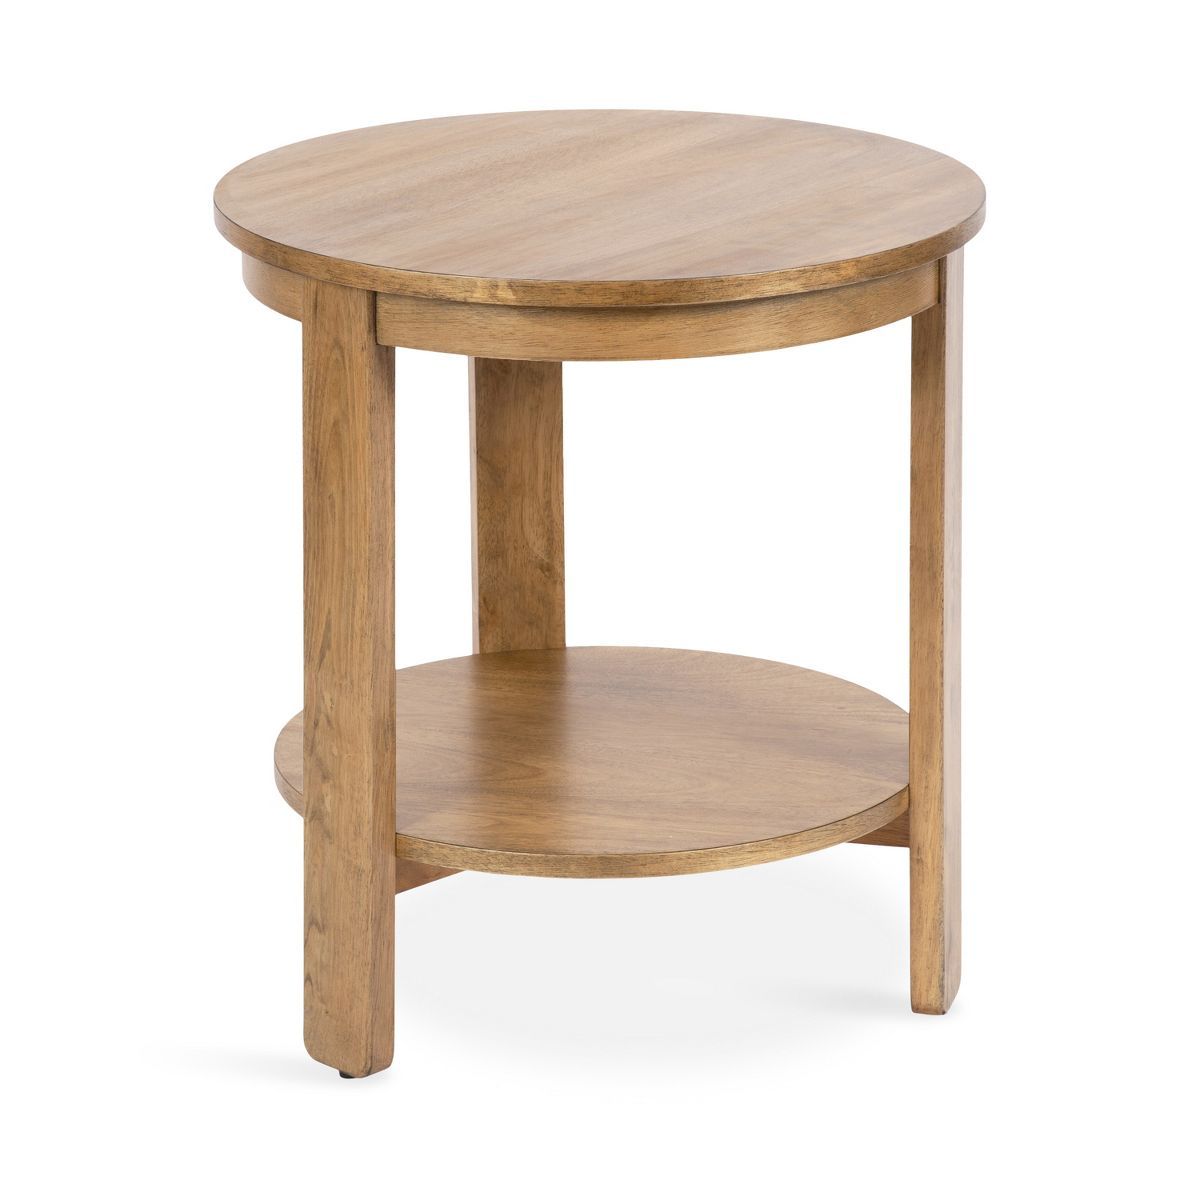 Kate and Laurel Foxford Round MDF Side Table, 22x22x24, Natural | Target